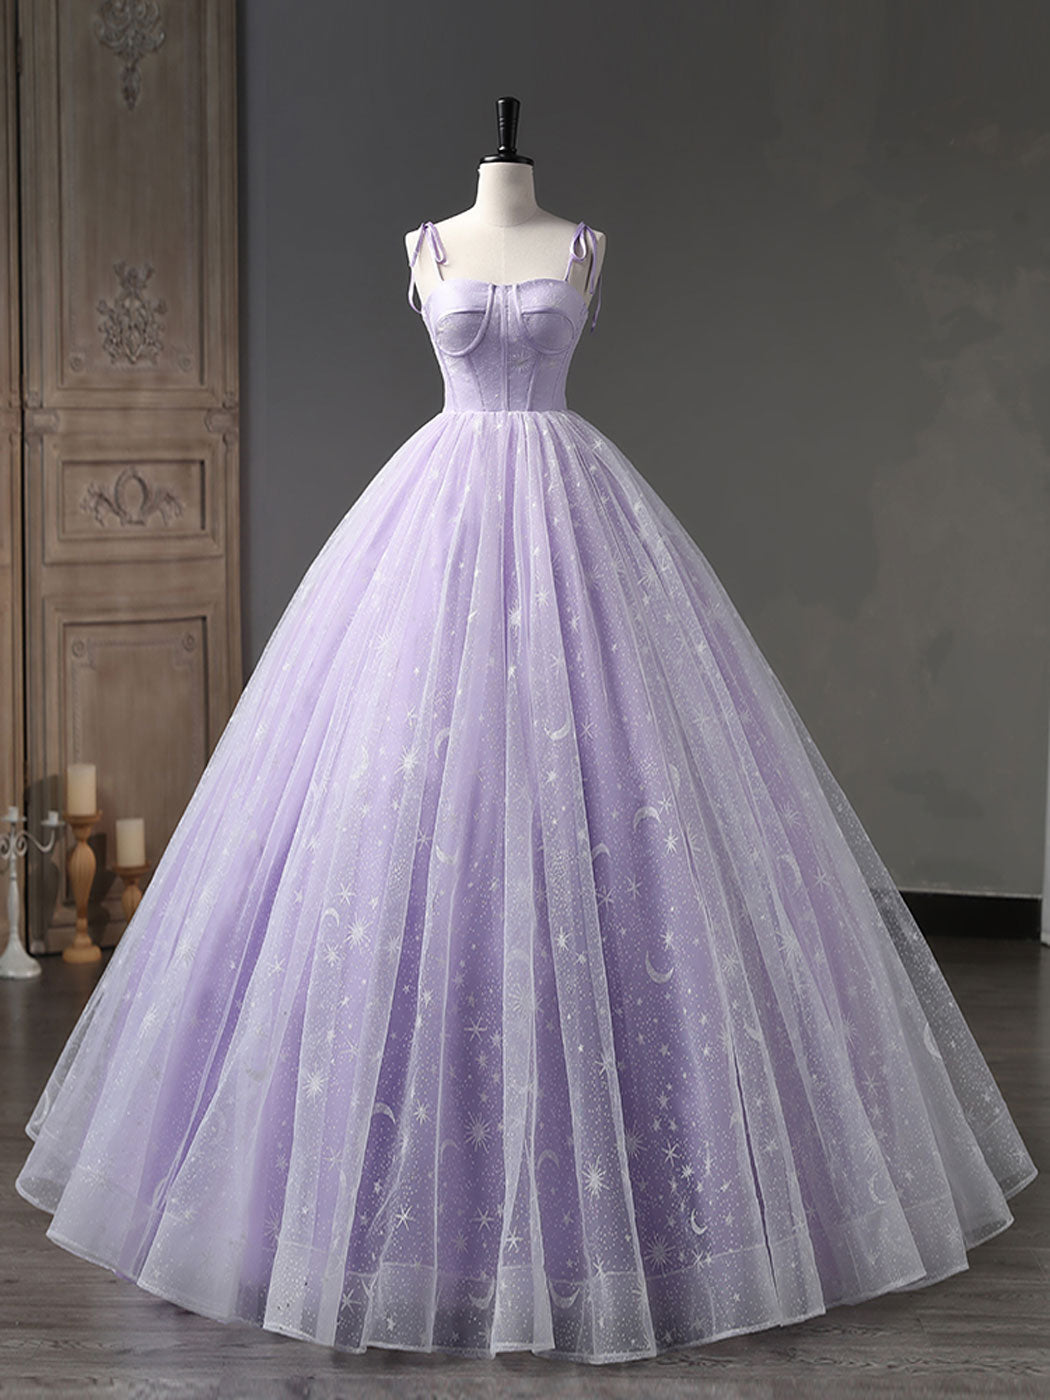 34,612 Ball Gown Royalty-Free Images, Stock Photos & Pictures | Shutterstock